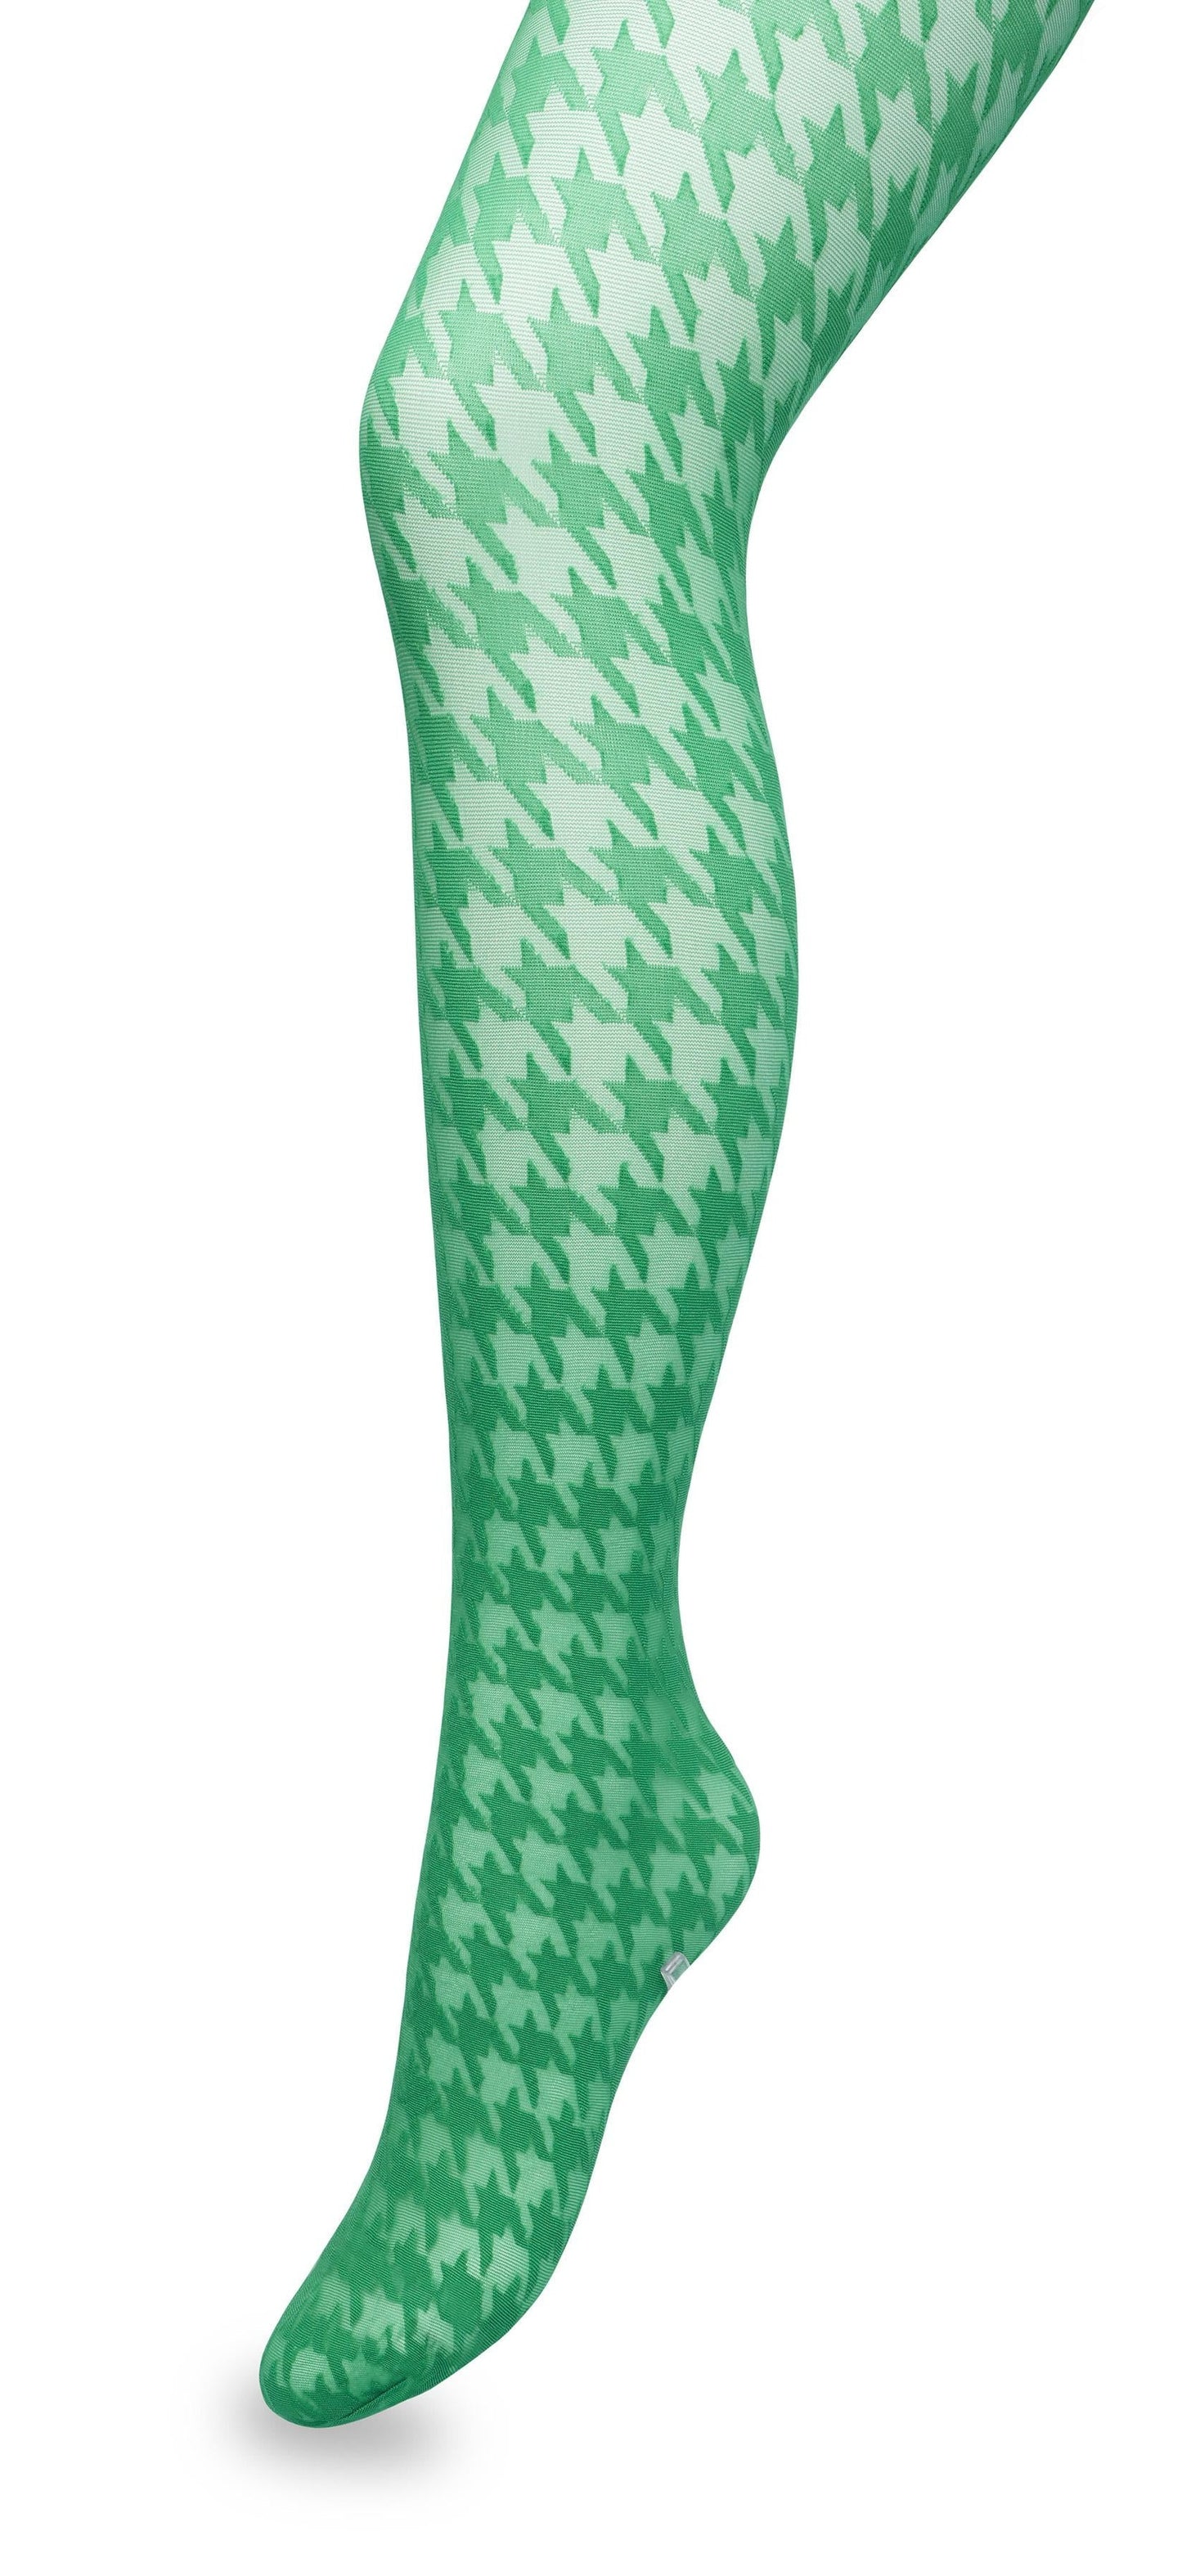 Bonnie Doon BP221903 Houndstooth Tights - Sheer fashion tights with a woven opaque dogtooth pattern in bright kelly green